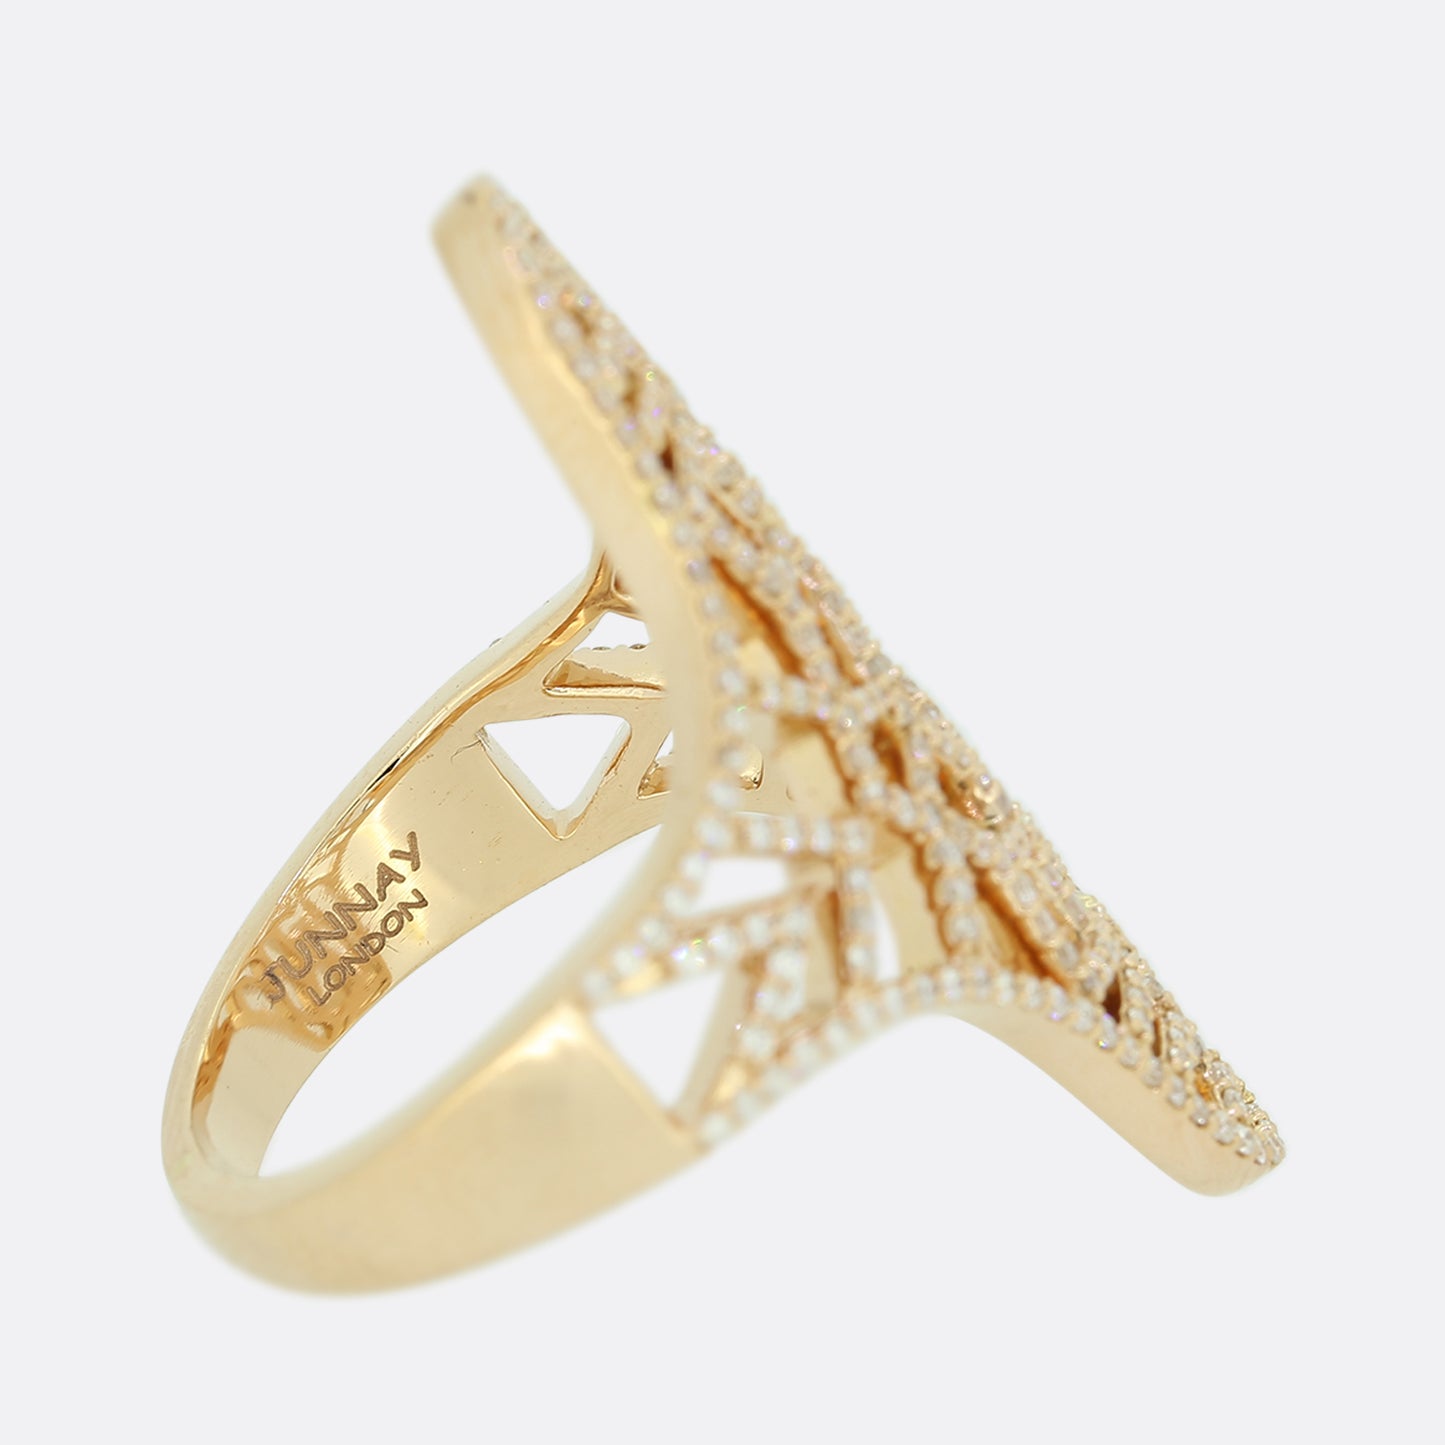 Junnay London Cracked Paint Effect Cocktail Ring